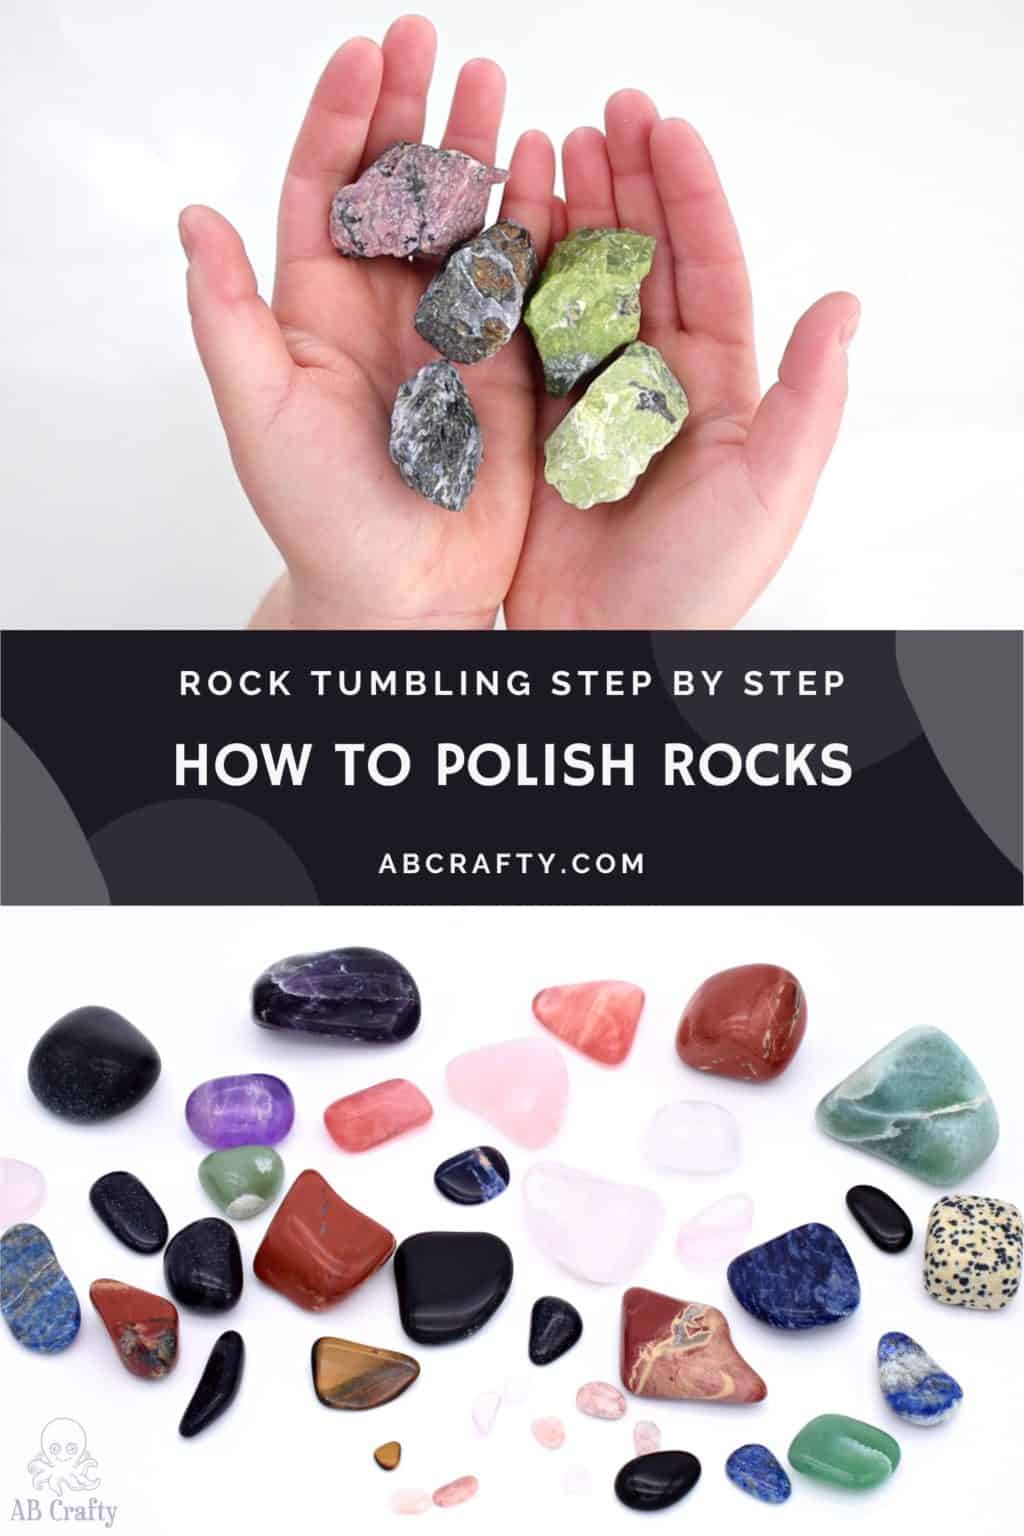 top photo is holding raw stones, including serpentine, gabbro, and rhododendrite with the bottom showing the finished polished rocks. the title says "rock tumbling step by step - how to polish rocks, abcrafty.com"